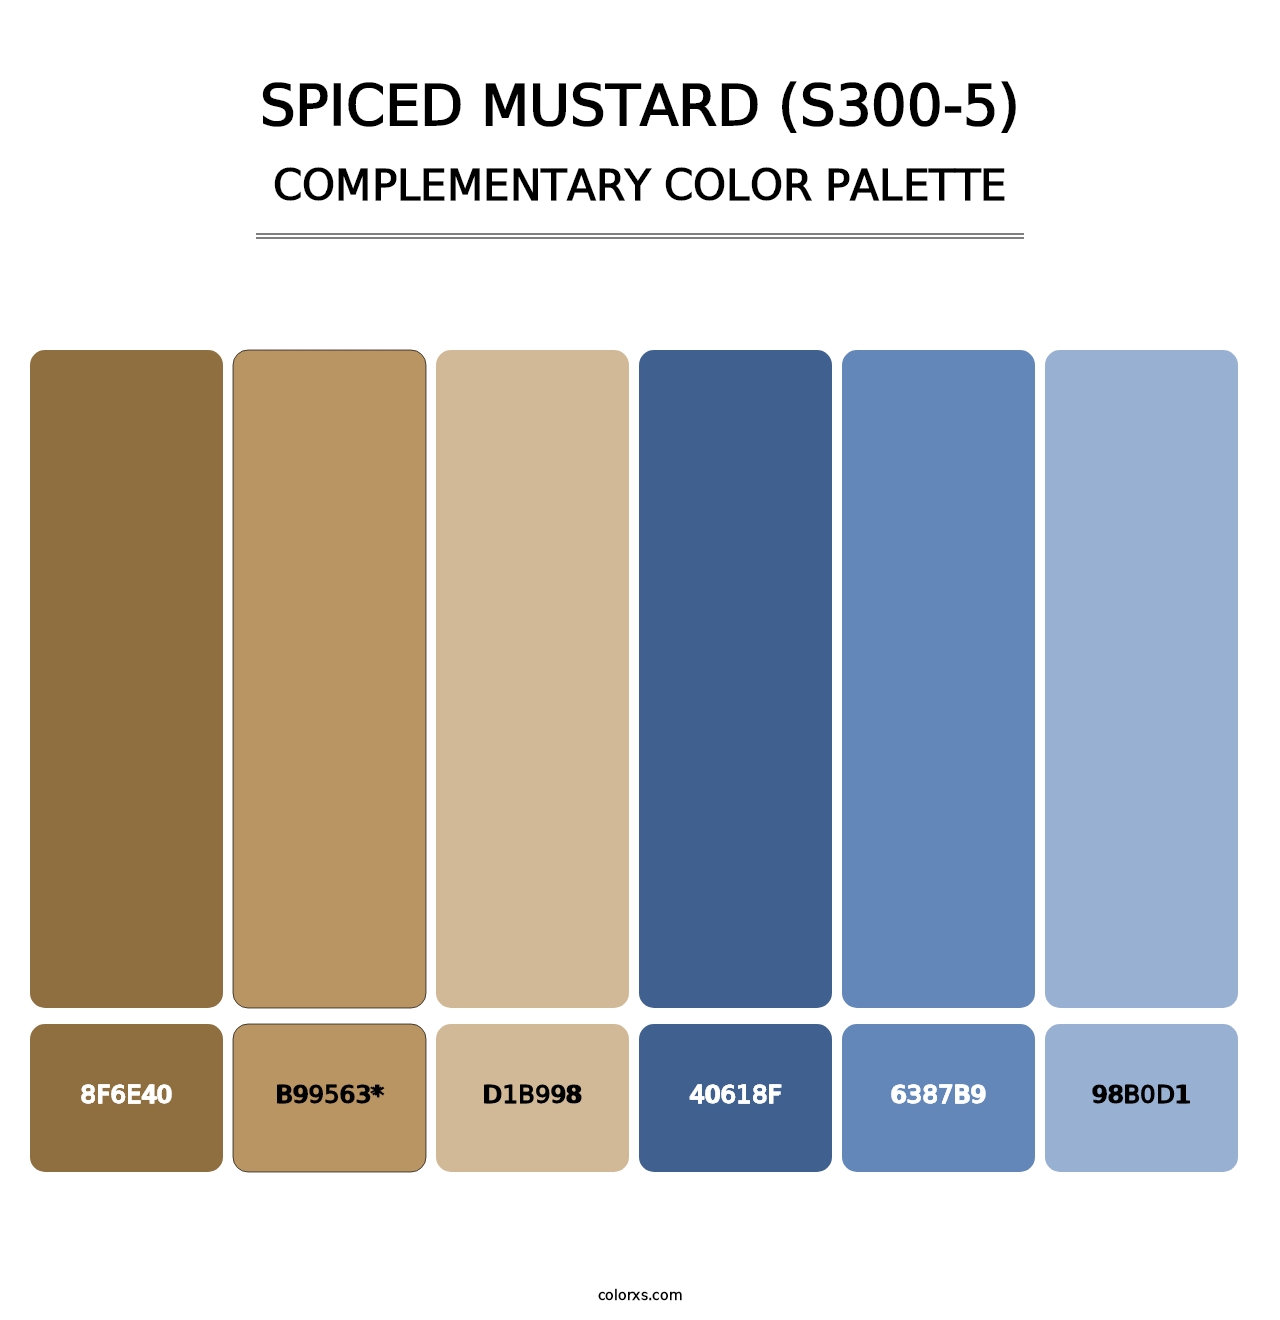 Spiced Mustard (S300-5) - Complementary Color Palette